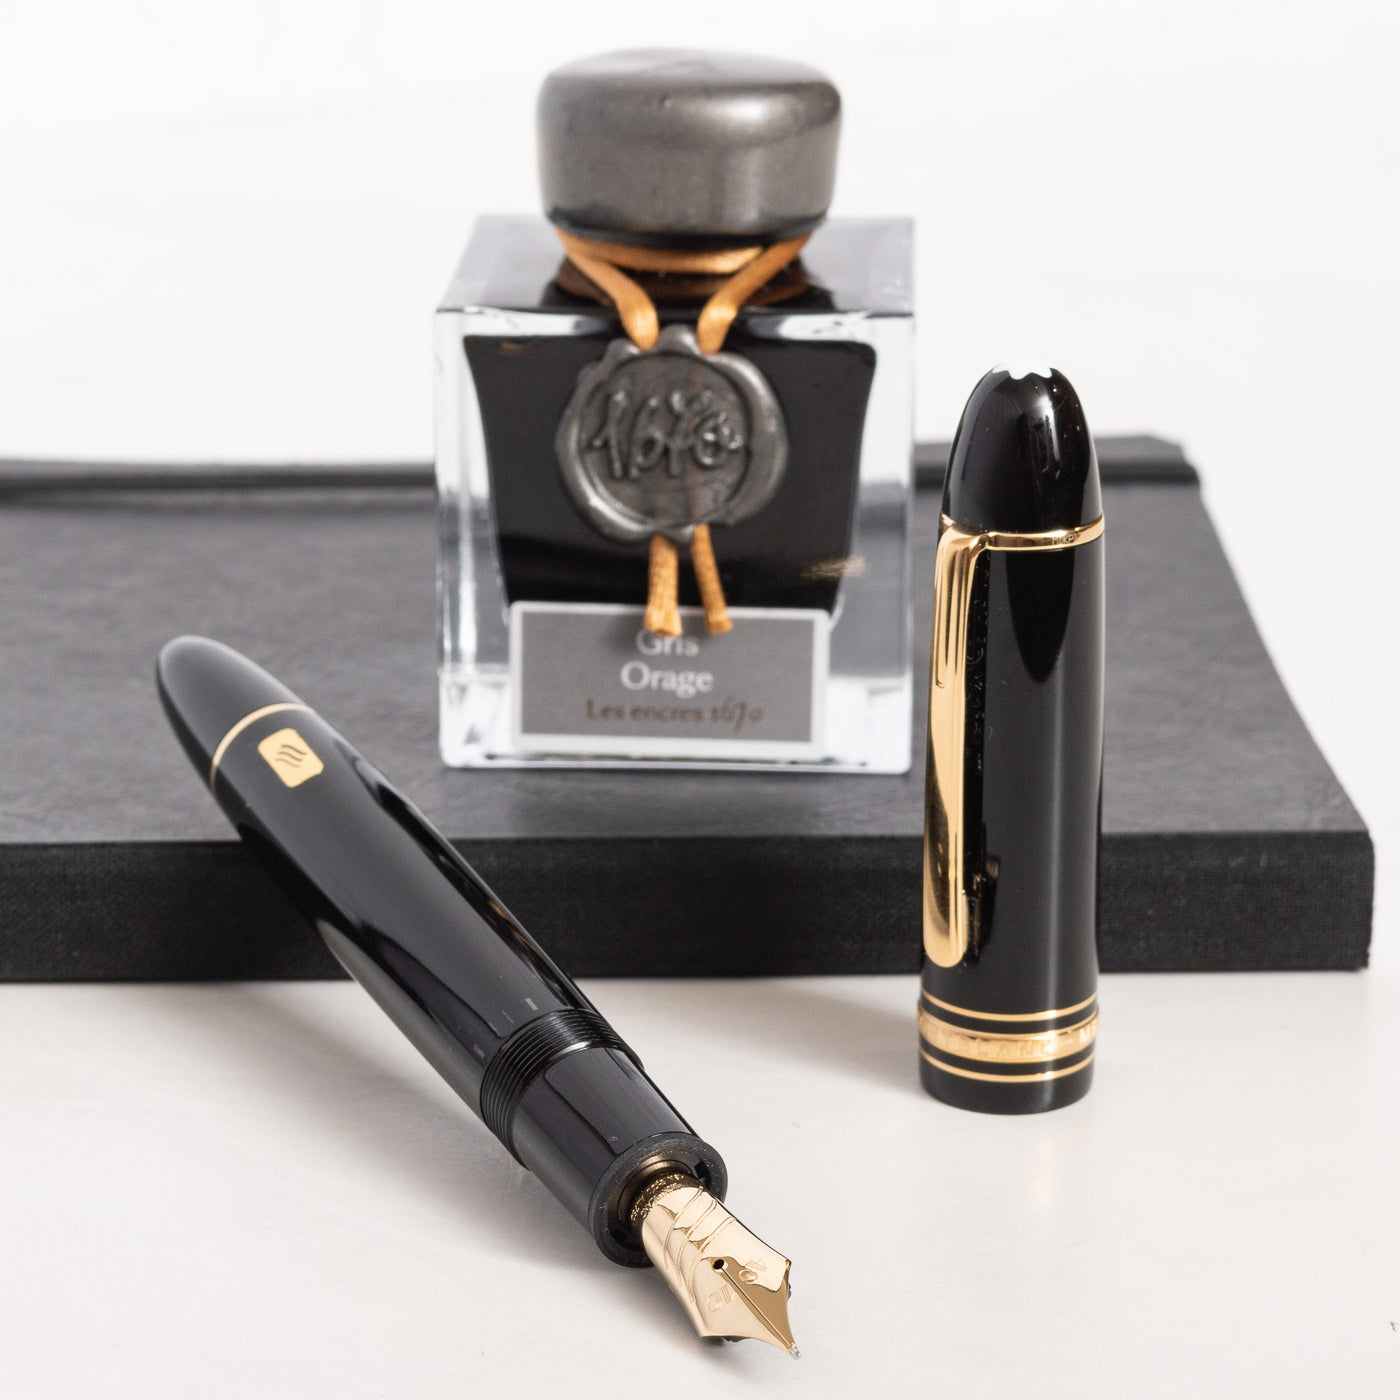 Montblanc Meisterstuck 149 Black & Gold Fountain Pen - Calligraphy Curved Nib uncapped